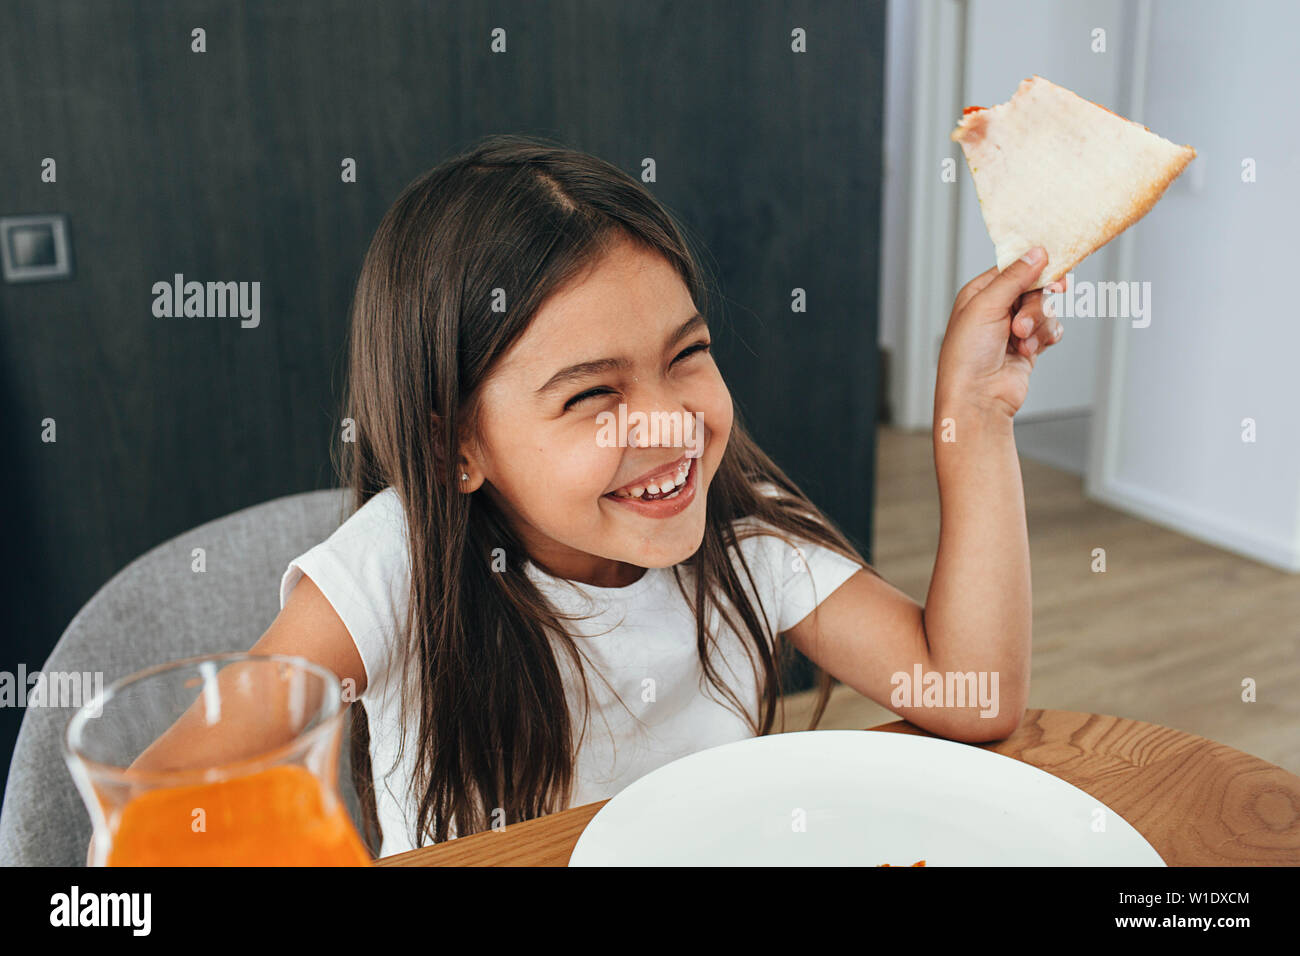 Funny cute little girl eating pizza and laughing Stock Photo